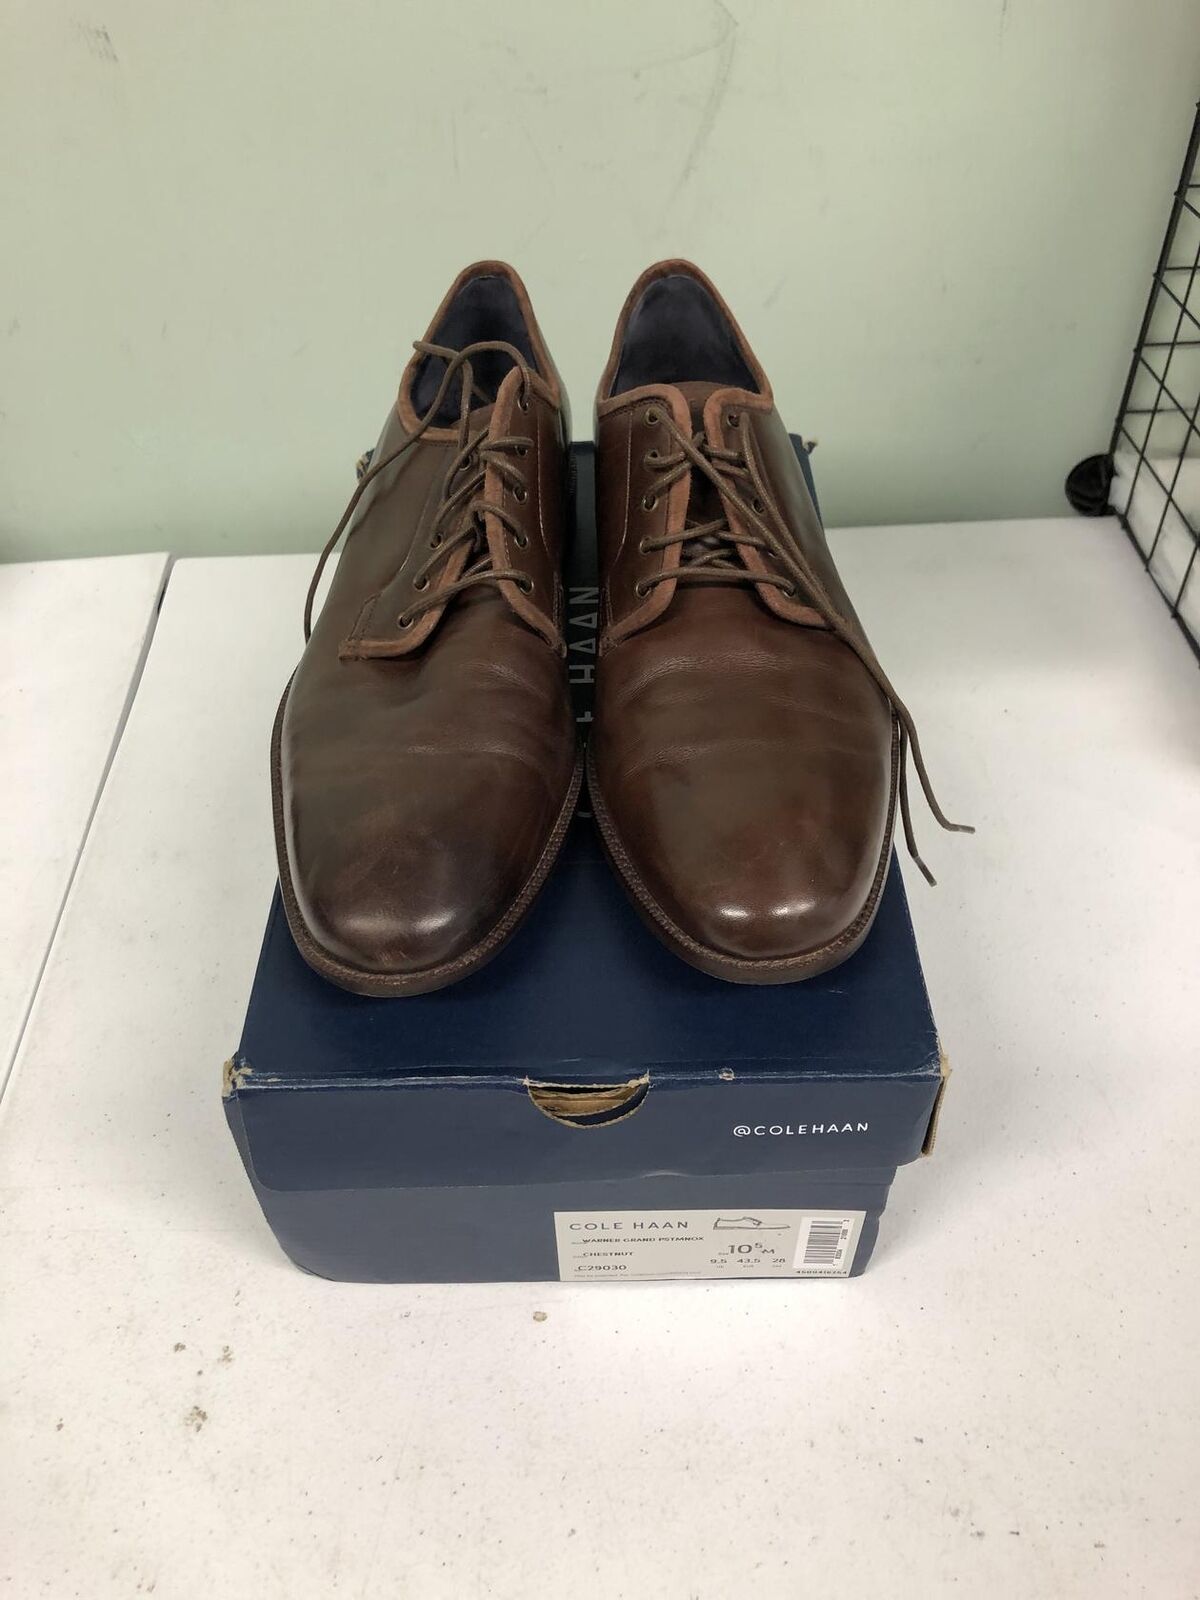 Primary image for Cole Haan Men's Wagner Grand Postman Oxford Shoe C29030 Chestnut Size 10.5M